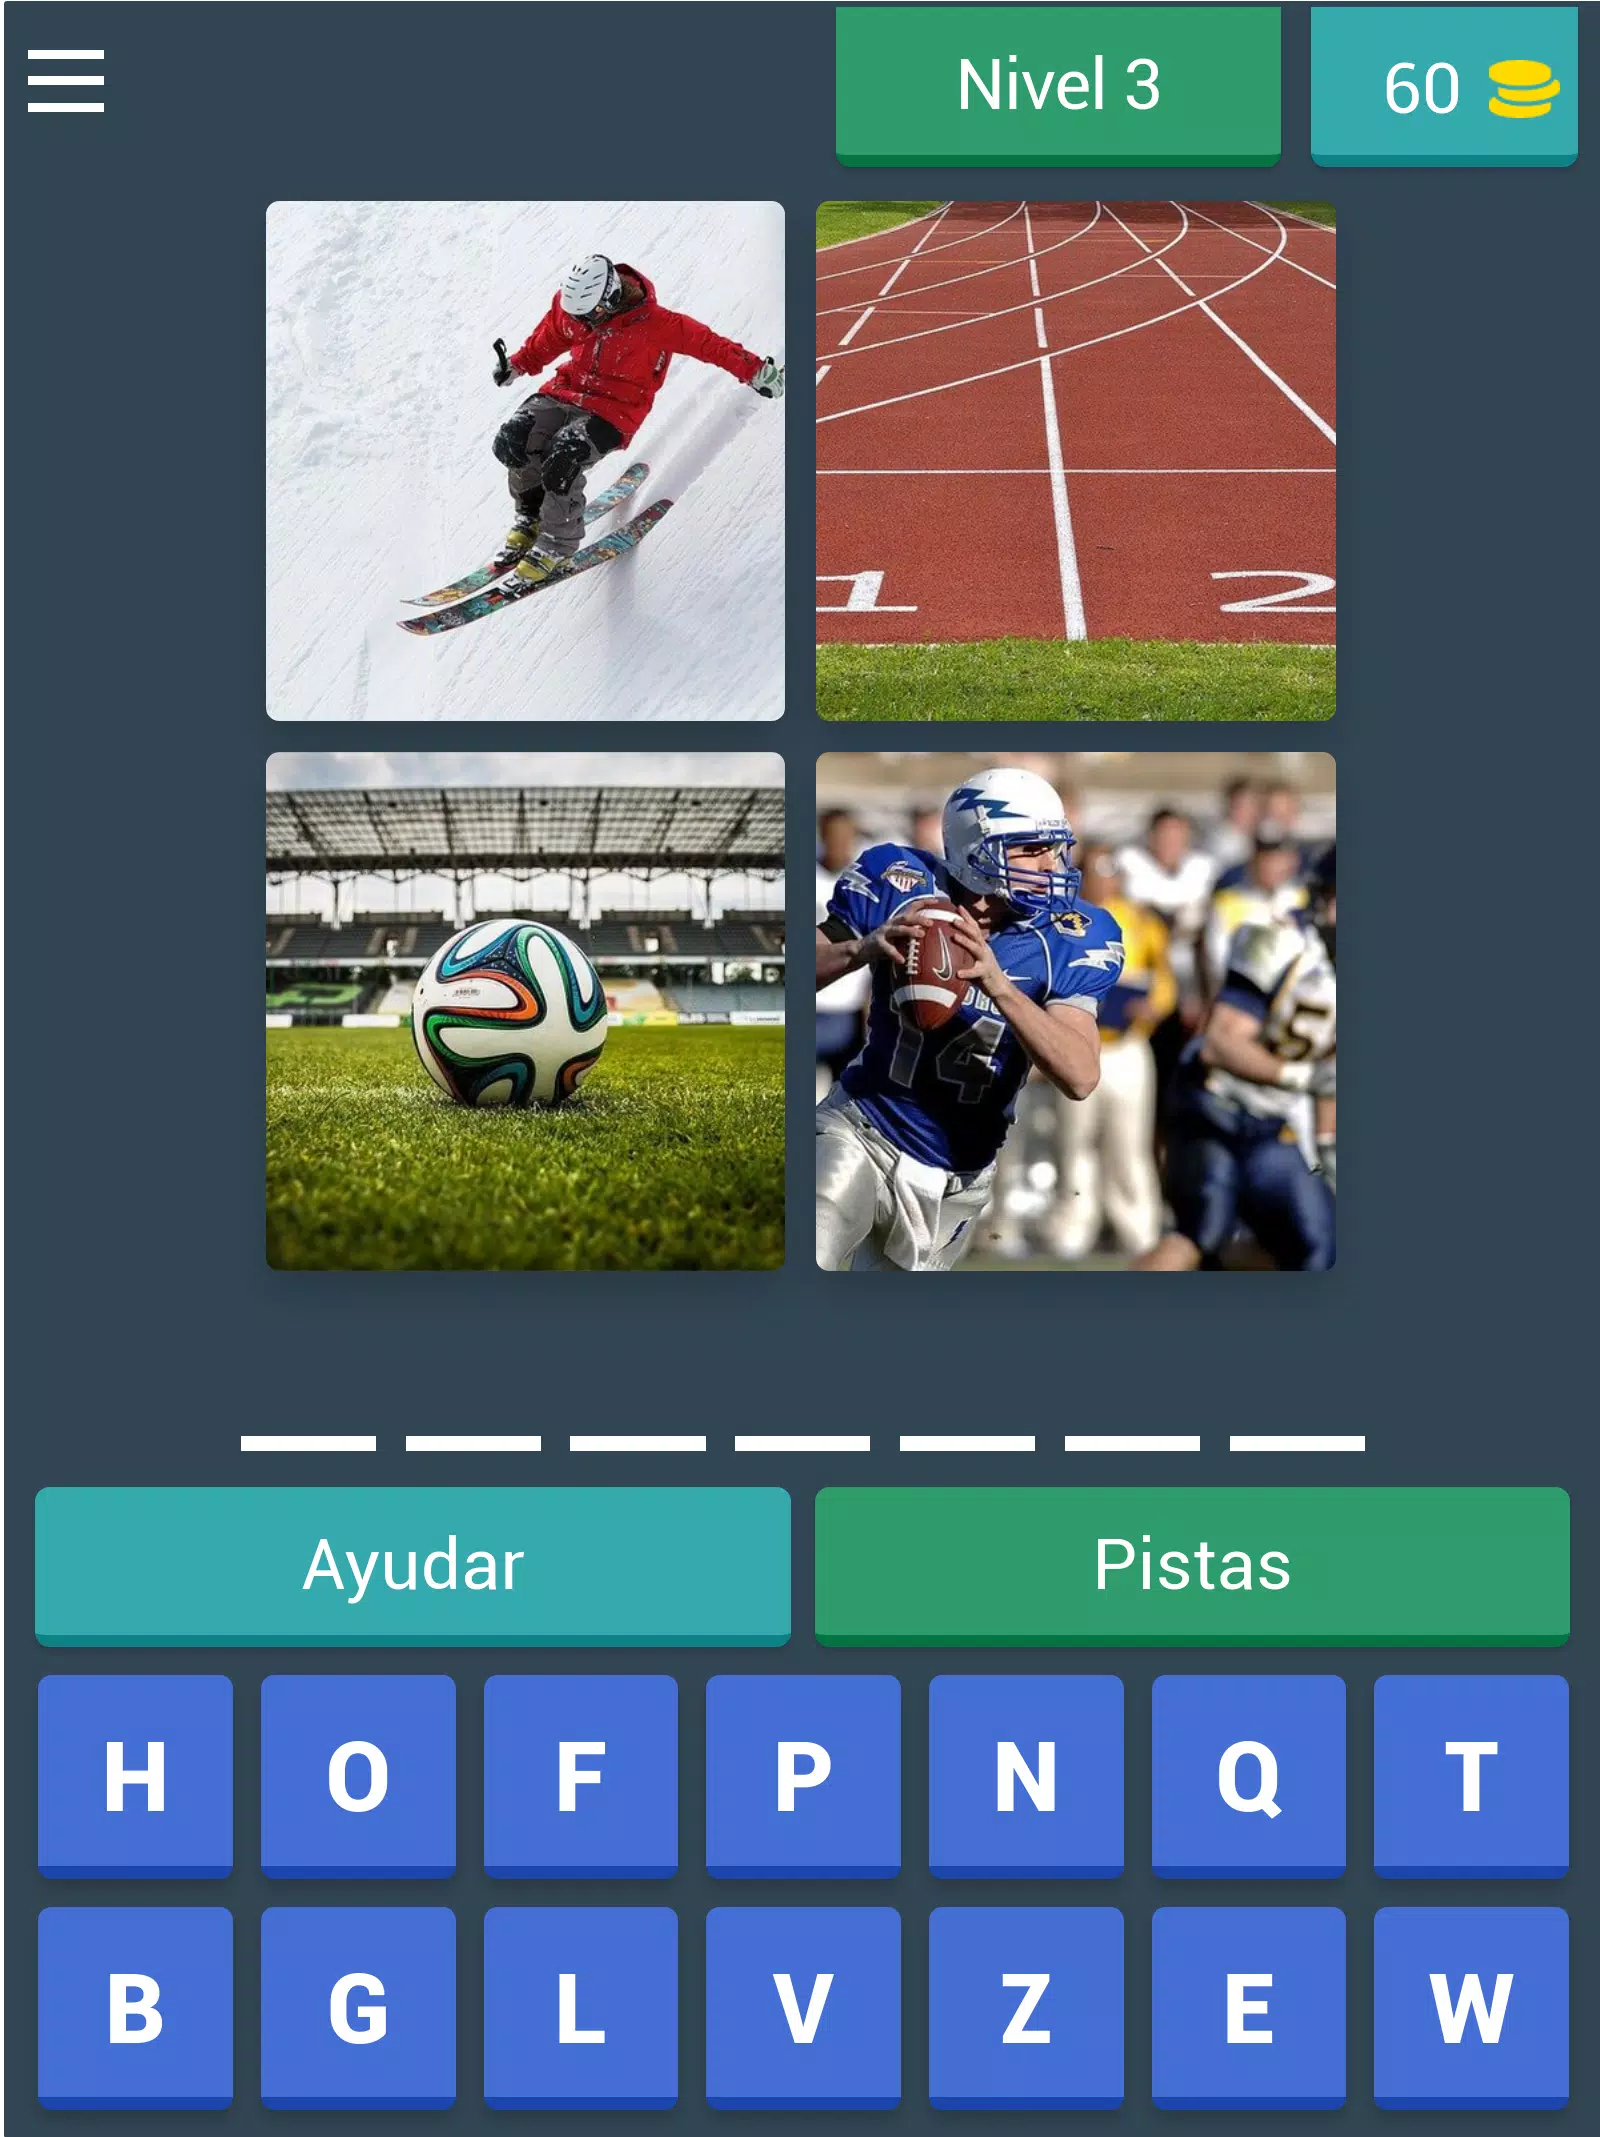 4 Fotos 1 Palabra for Android - APK Download